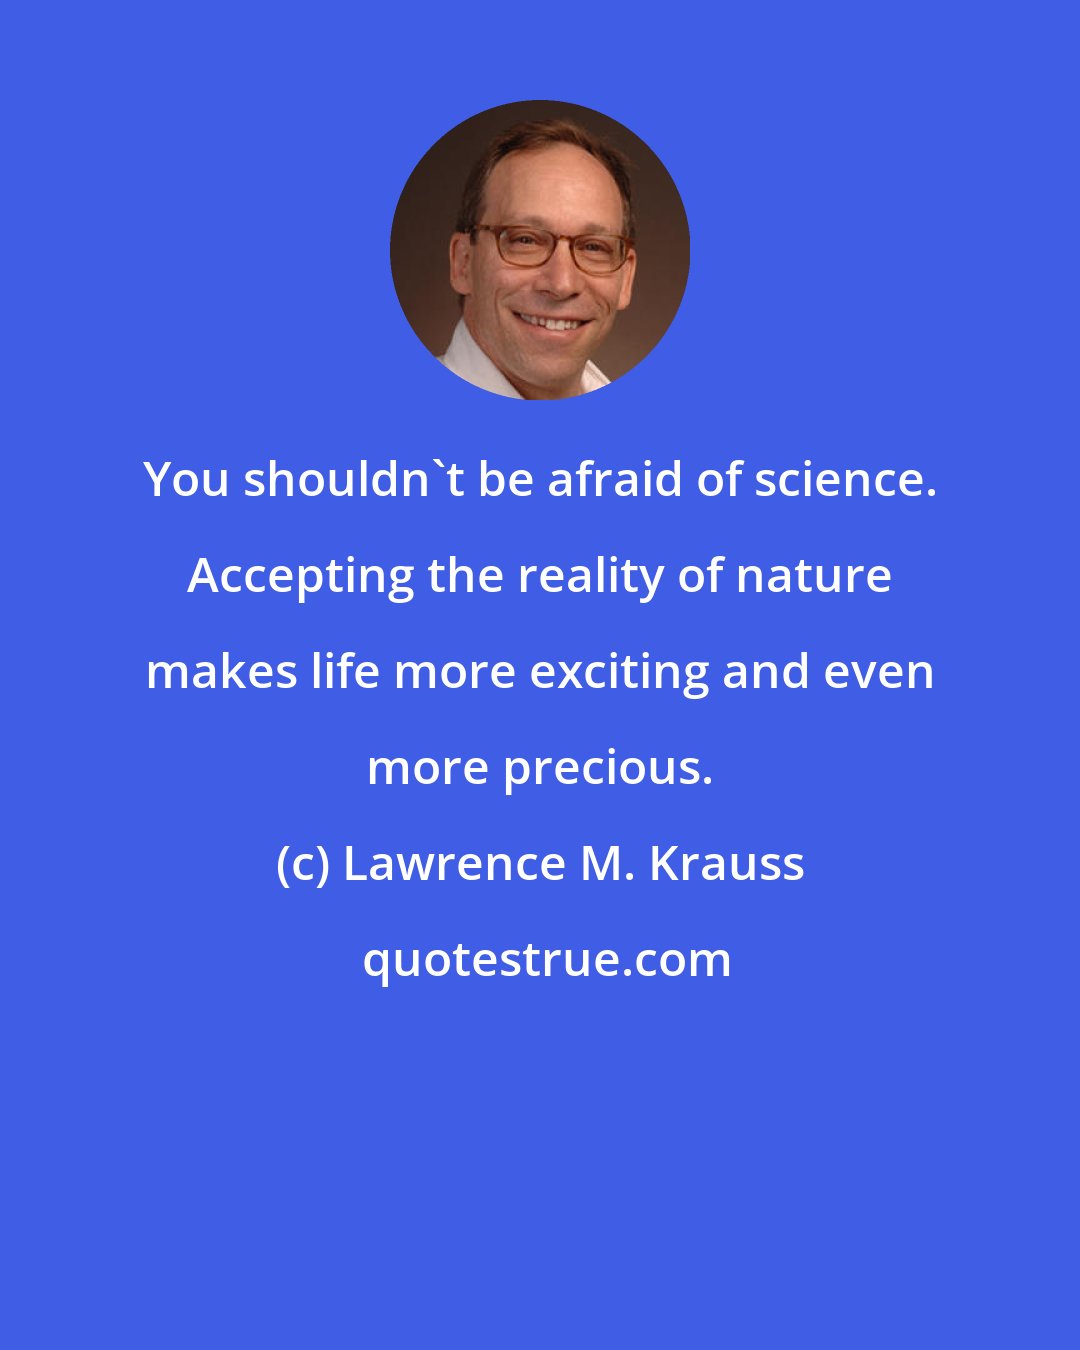 Lawrence M. Krauss: You shouldn't be afraid of science. Accepting the reality of nature makes life more exciting and even more precious.